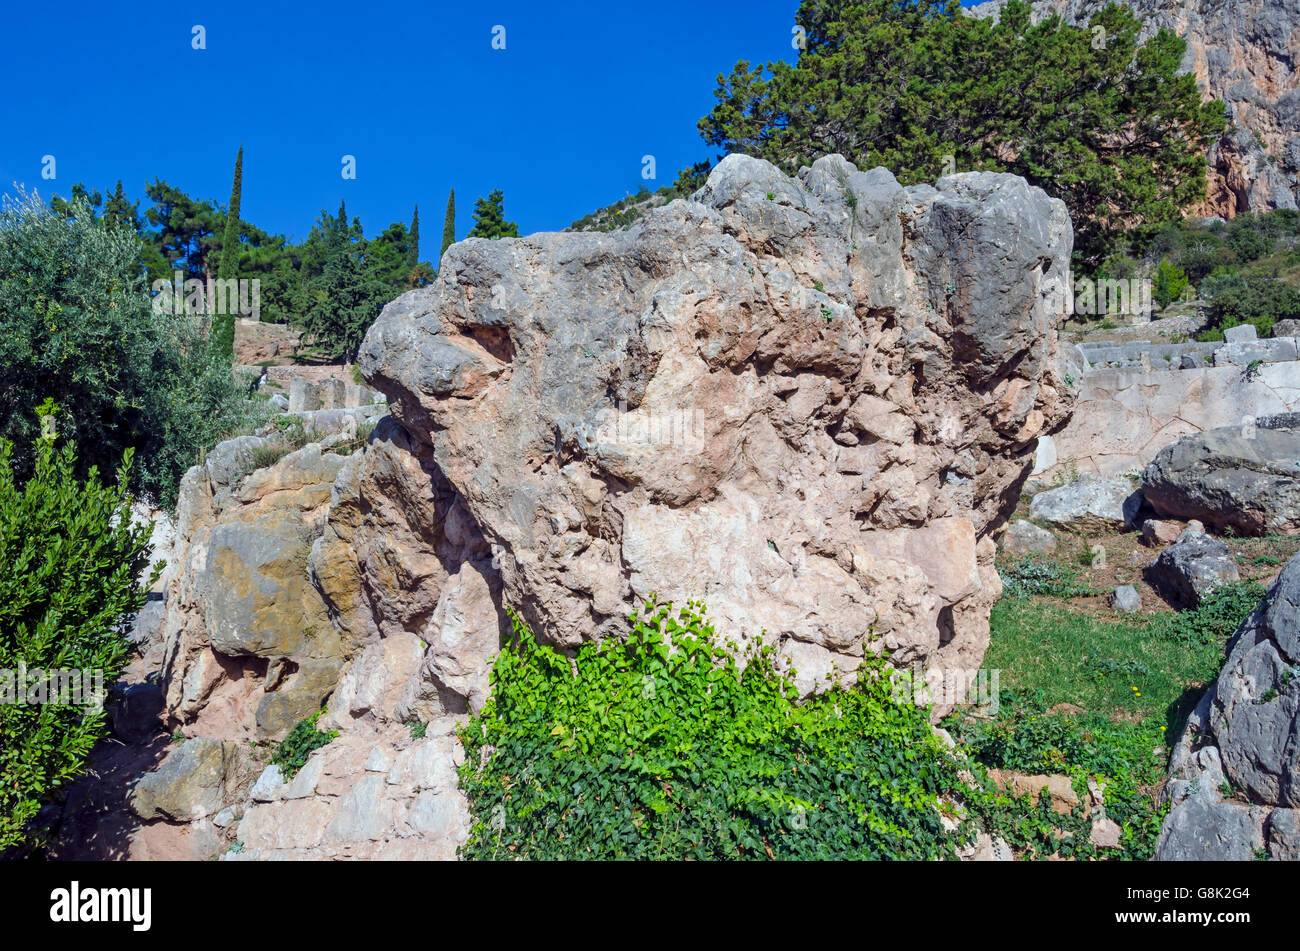 The Sibyl rock where the Delphi priestess Sibyl foretold the future at Archaeological Site of Delphi Greece. Stock Photo